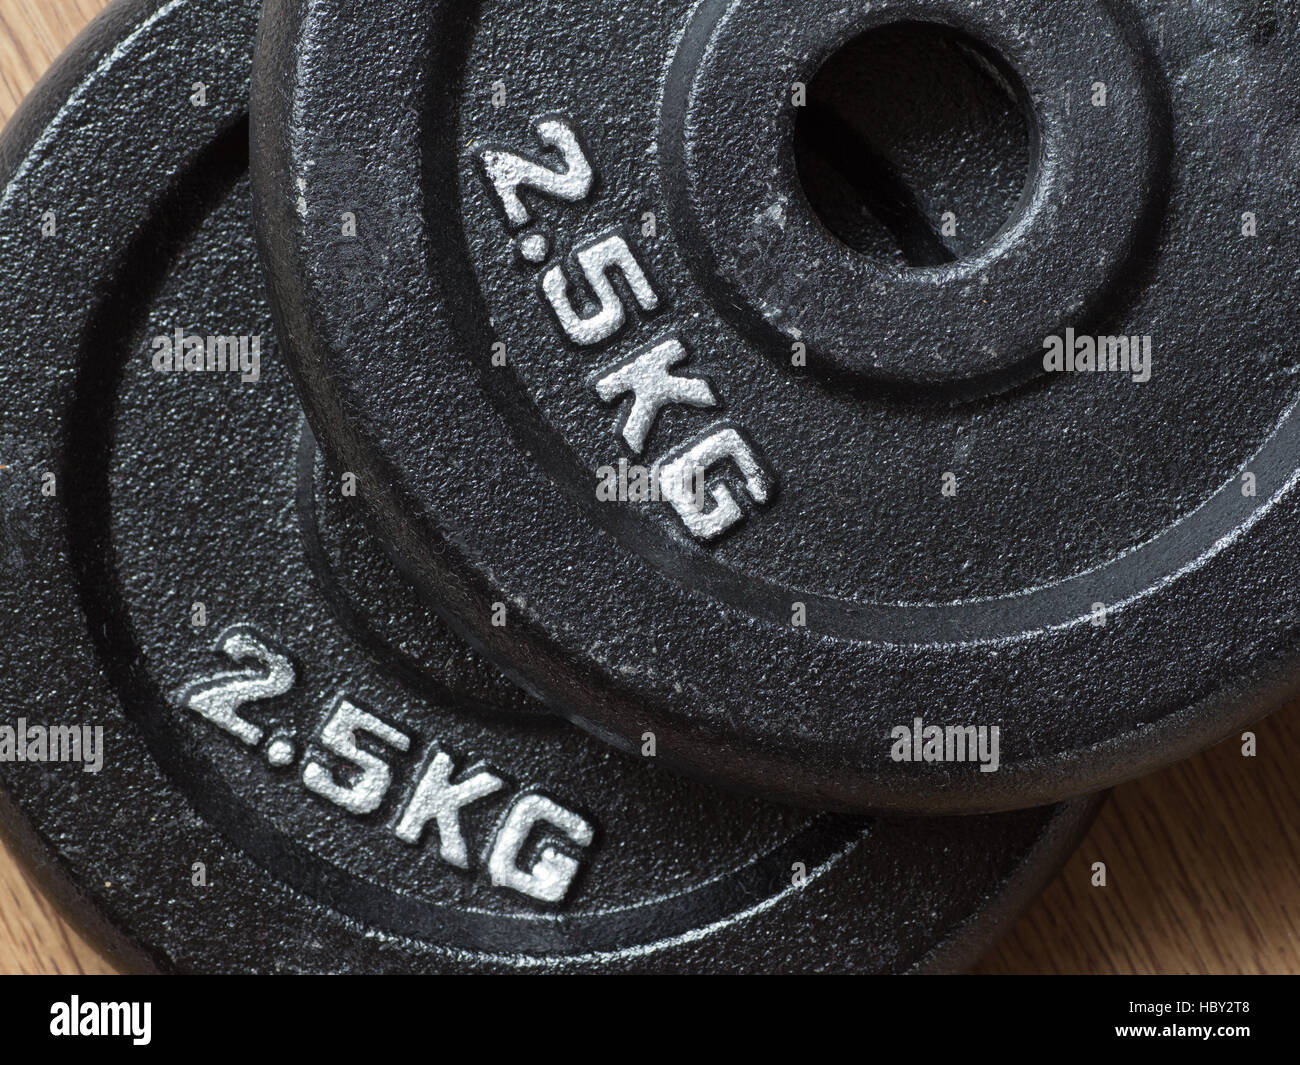 Two 2.5kg weight plates of barbell piled on the floor Stock Photo